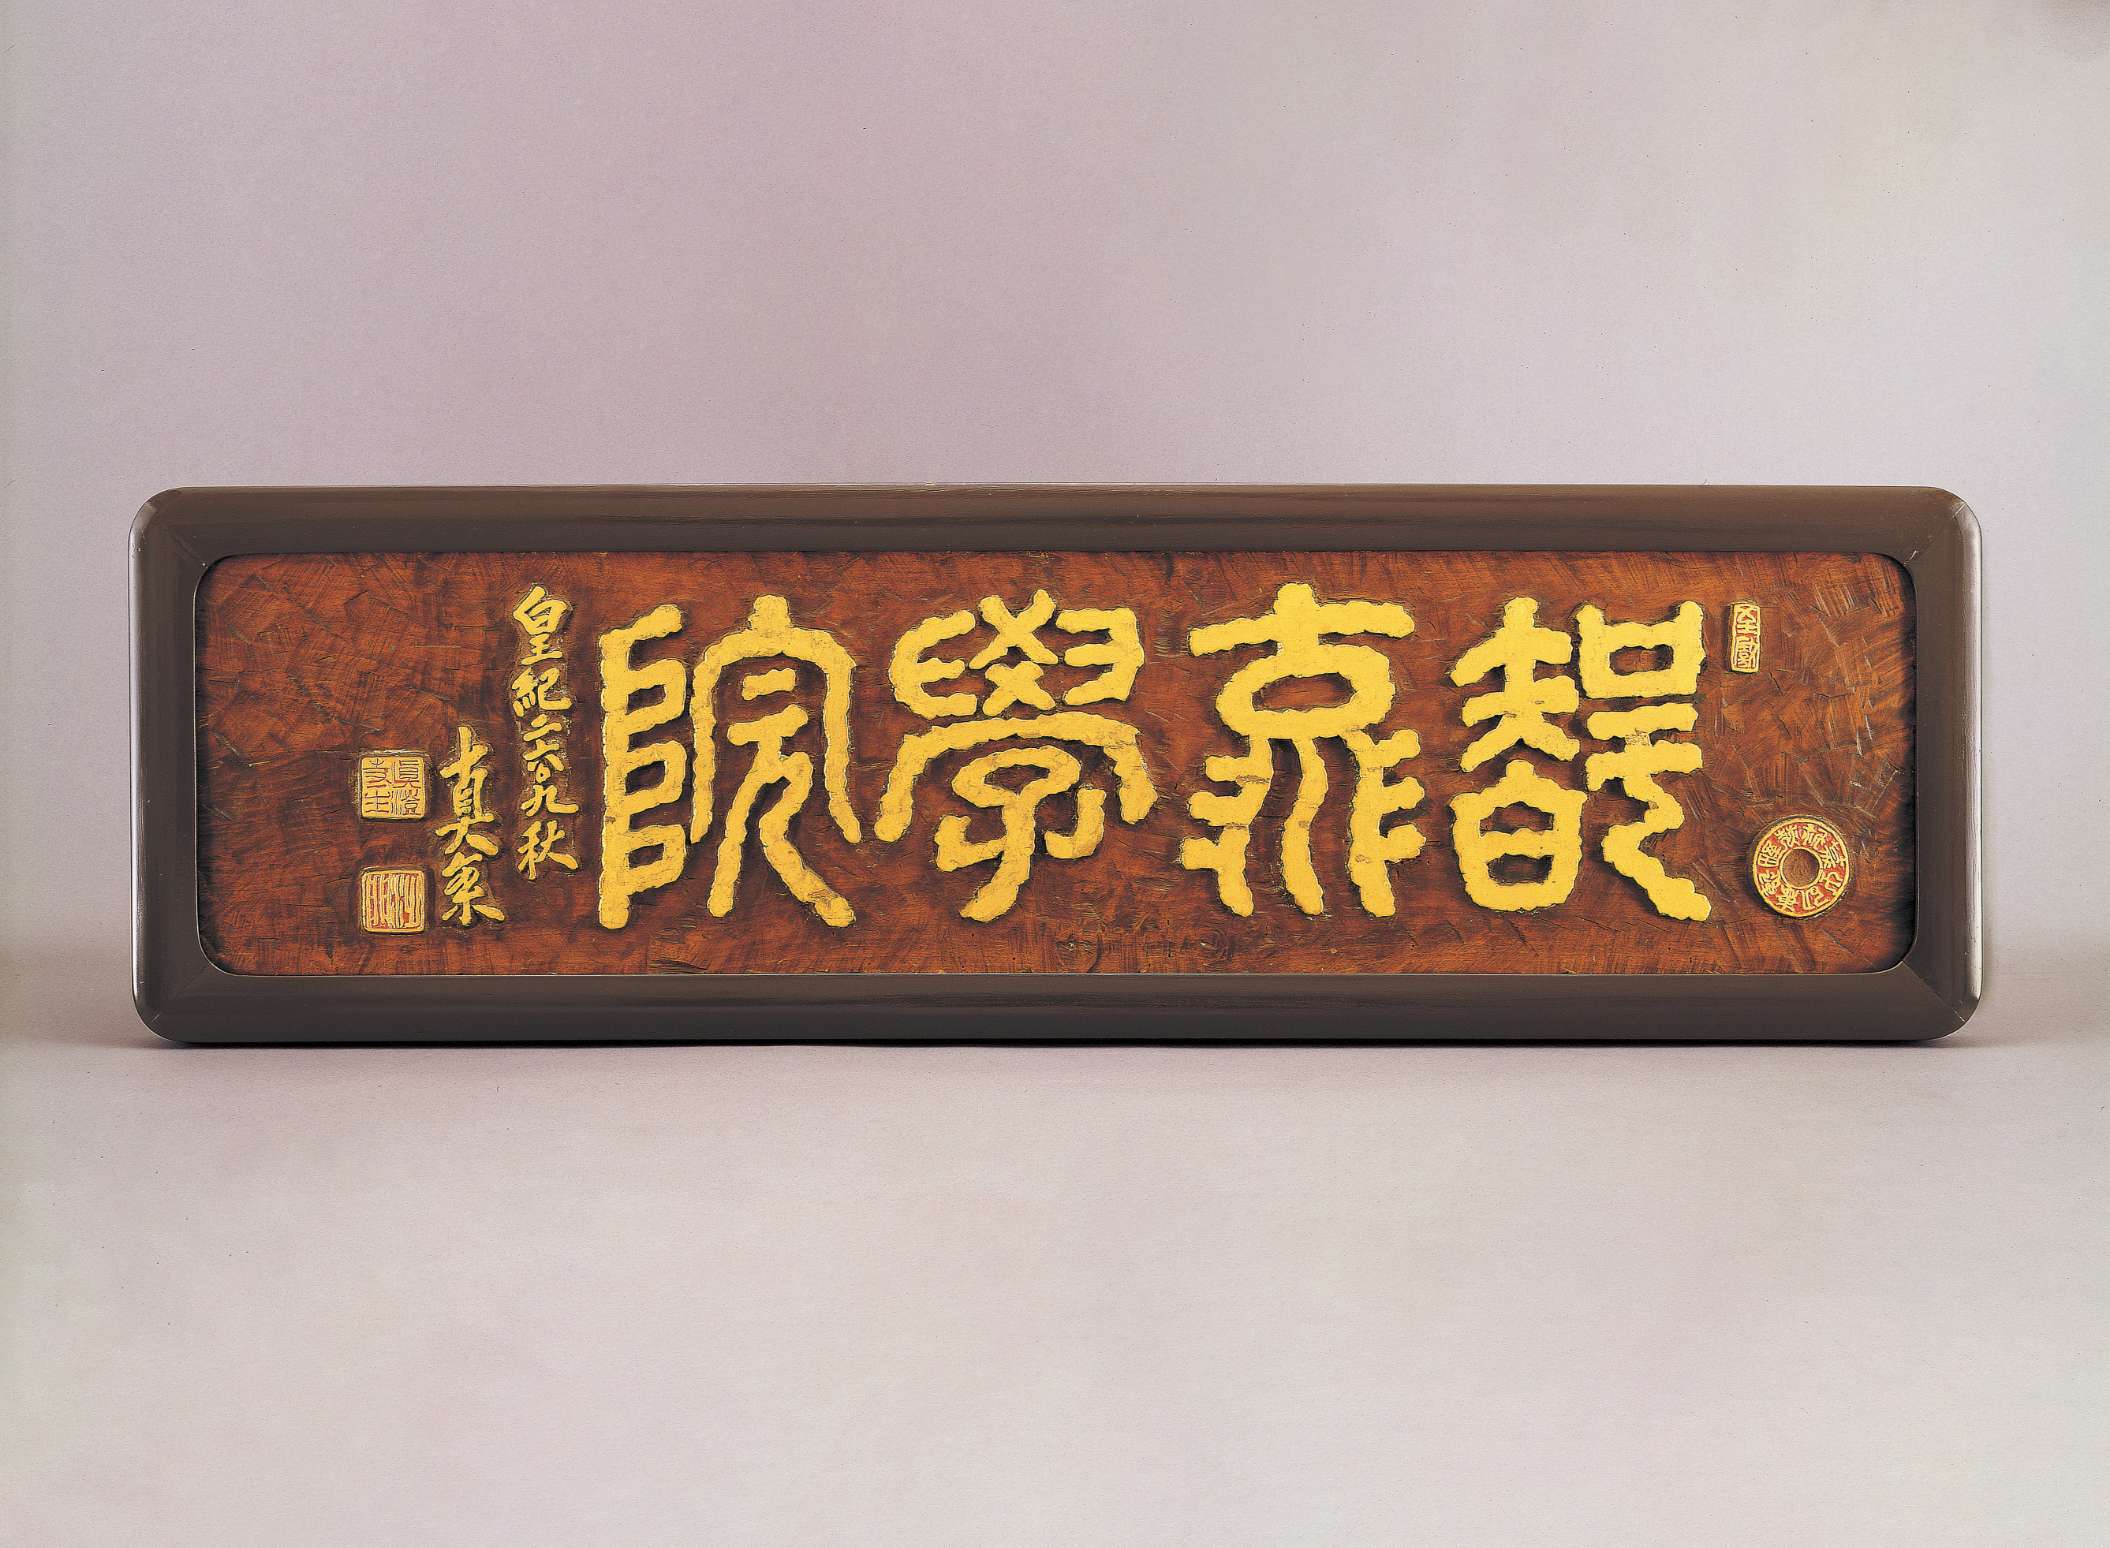 Stylized, thick-lined Japanese characters in gold are carved into a slab of cherry stained wood, framed by a polished border, embellished by adjacent golden calligraphy and square seals.